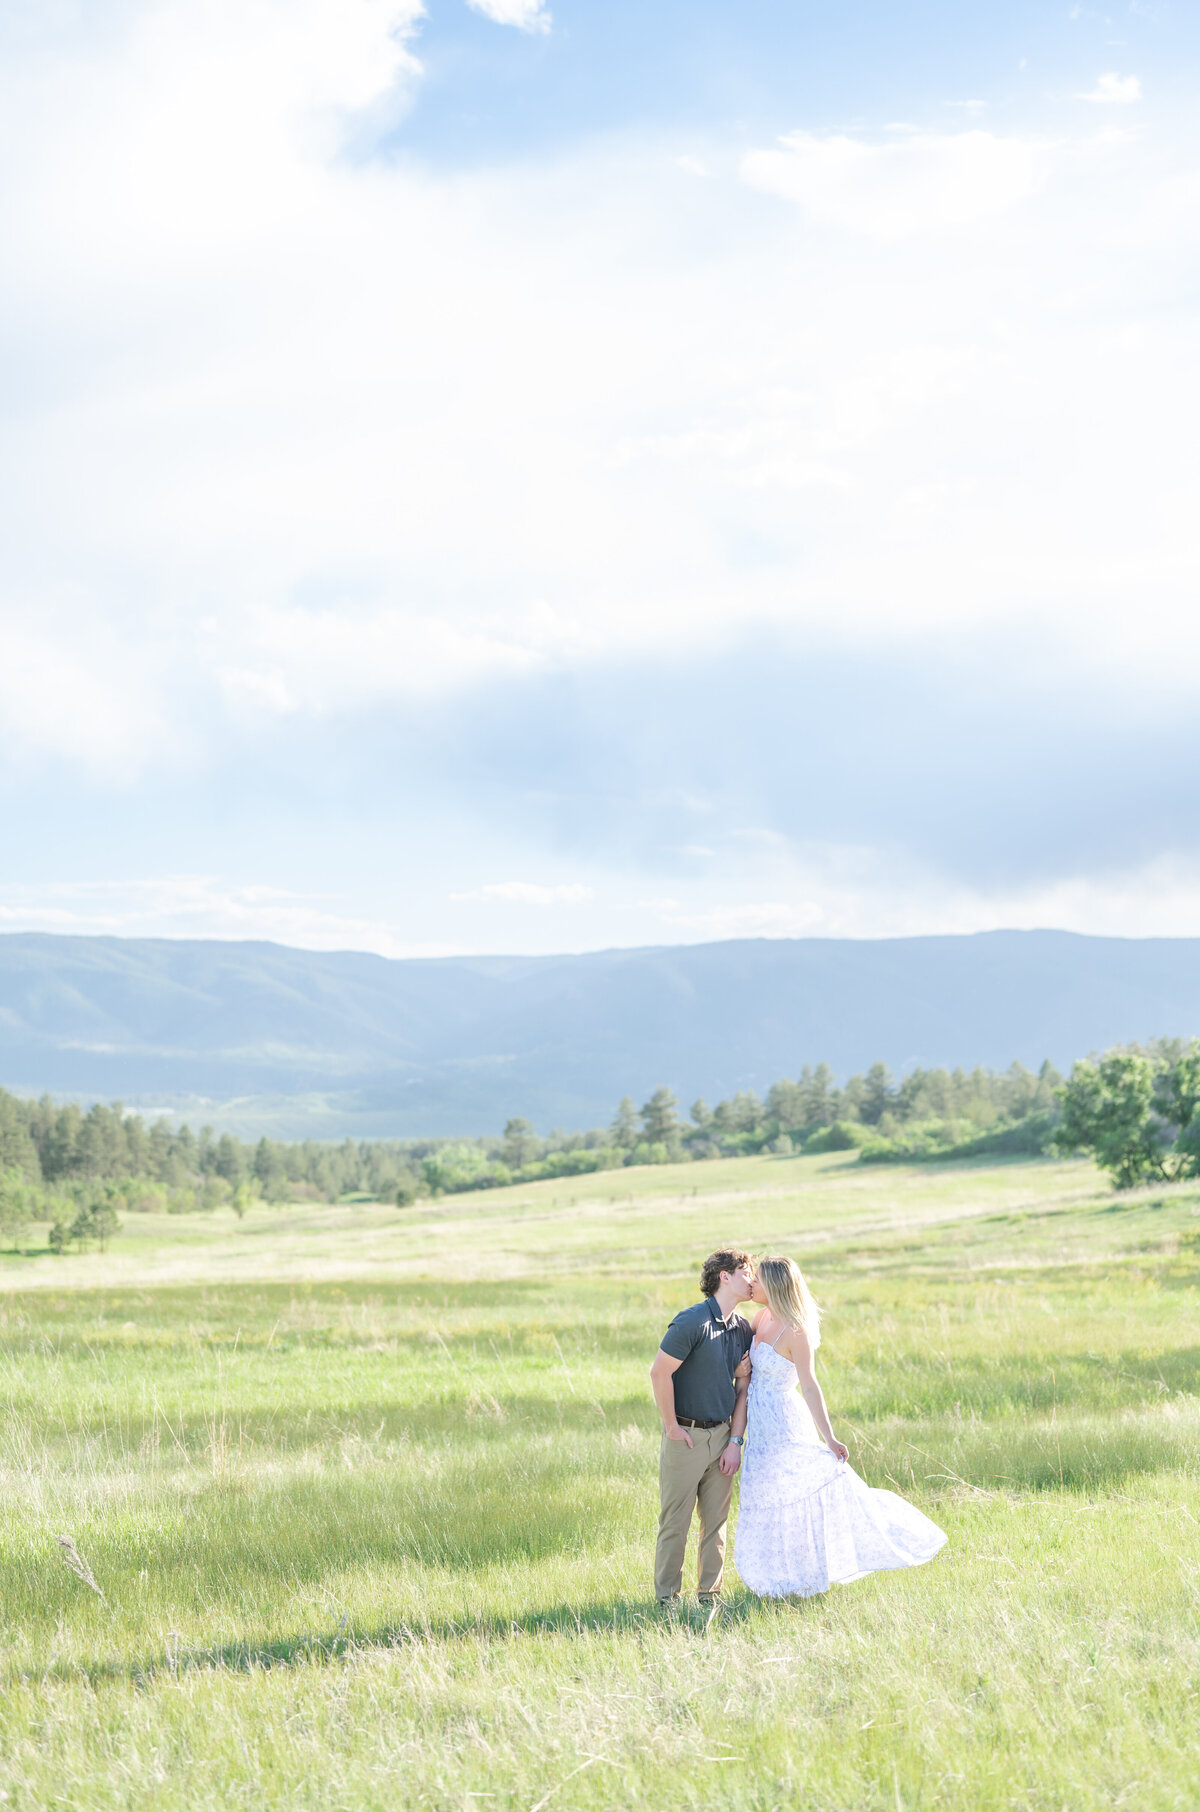 Couple kissing in an open meadow field with the mountains behind them